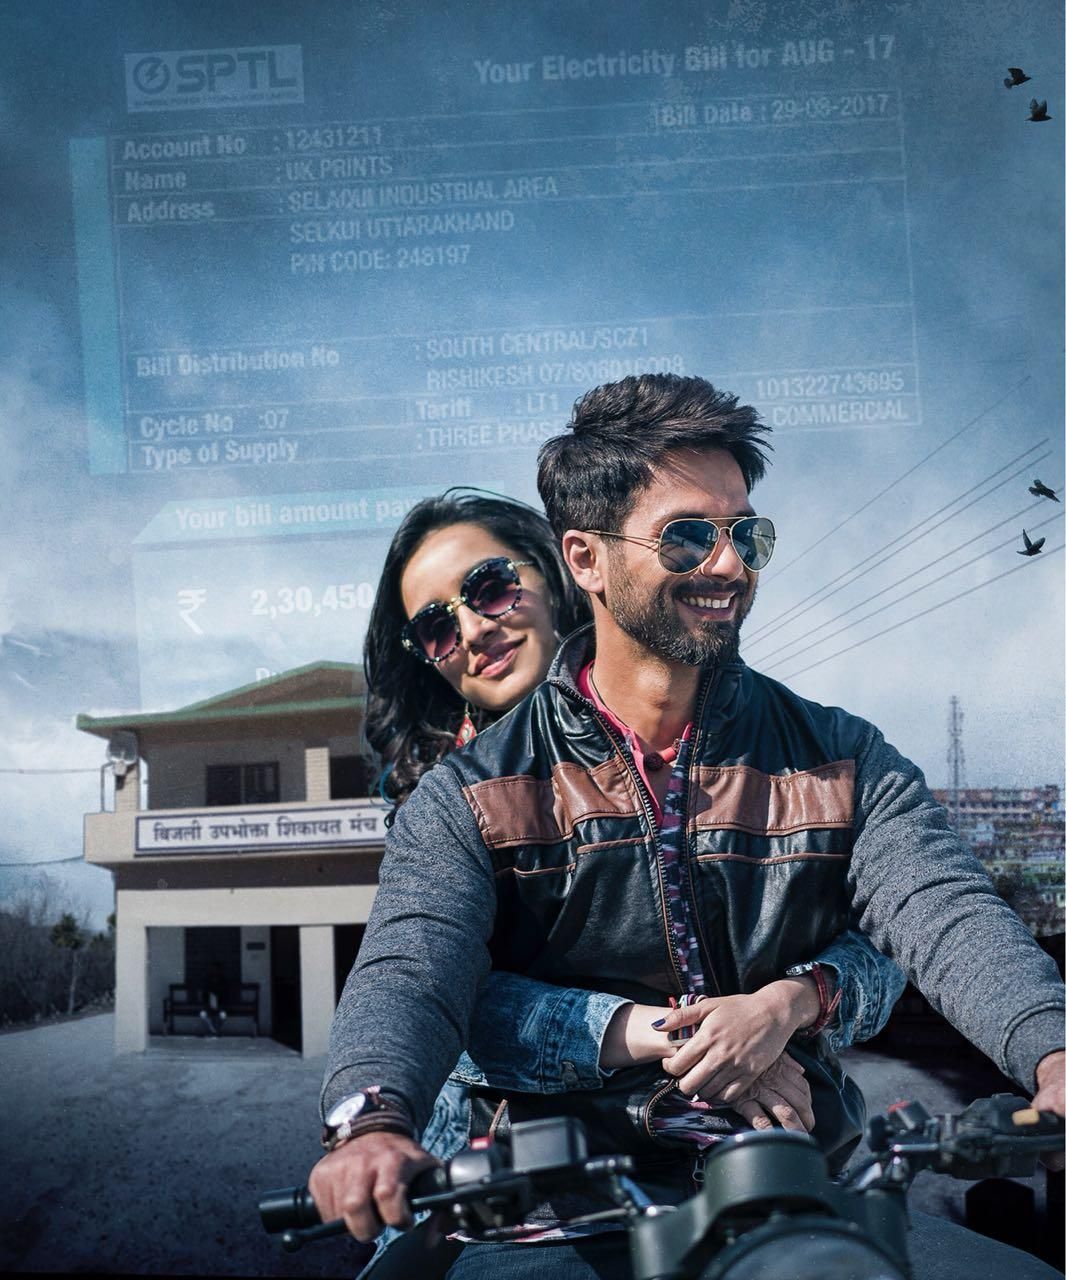 Shahid Kapoor and Shraddha Kapoor starrer Batti Gul Meter Chaalu trailer to be launched today